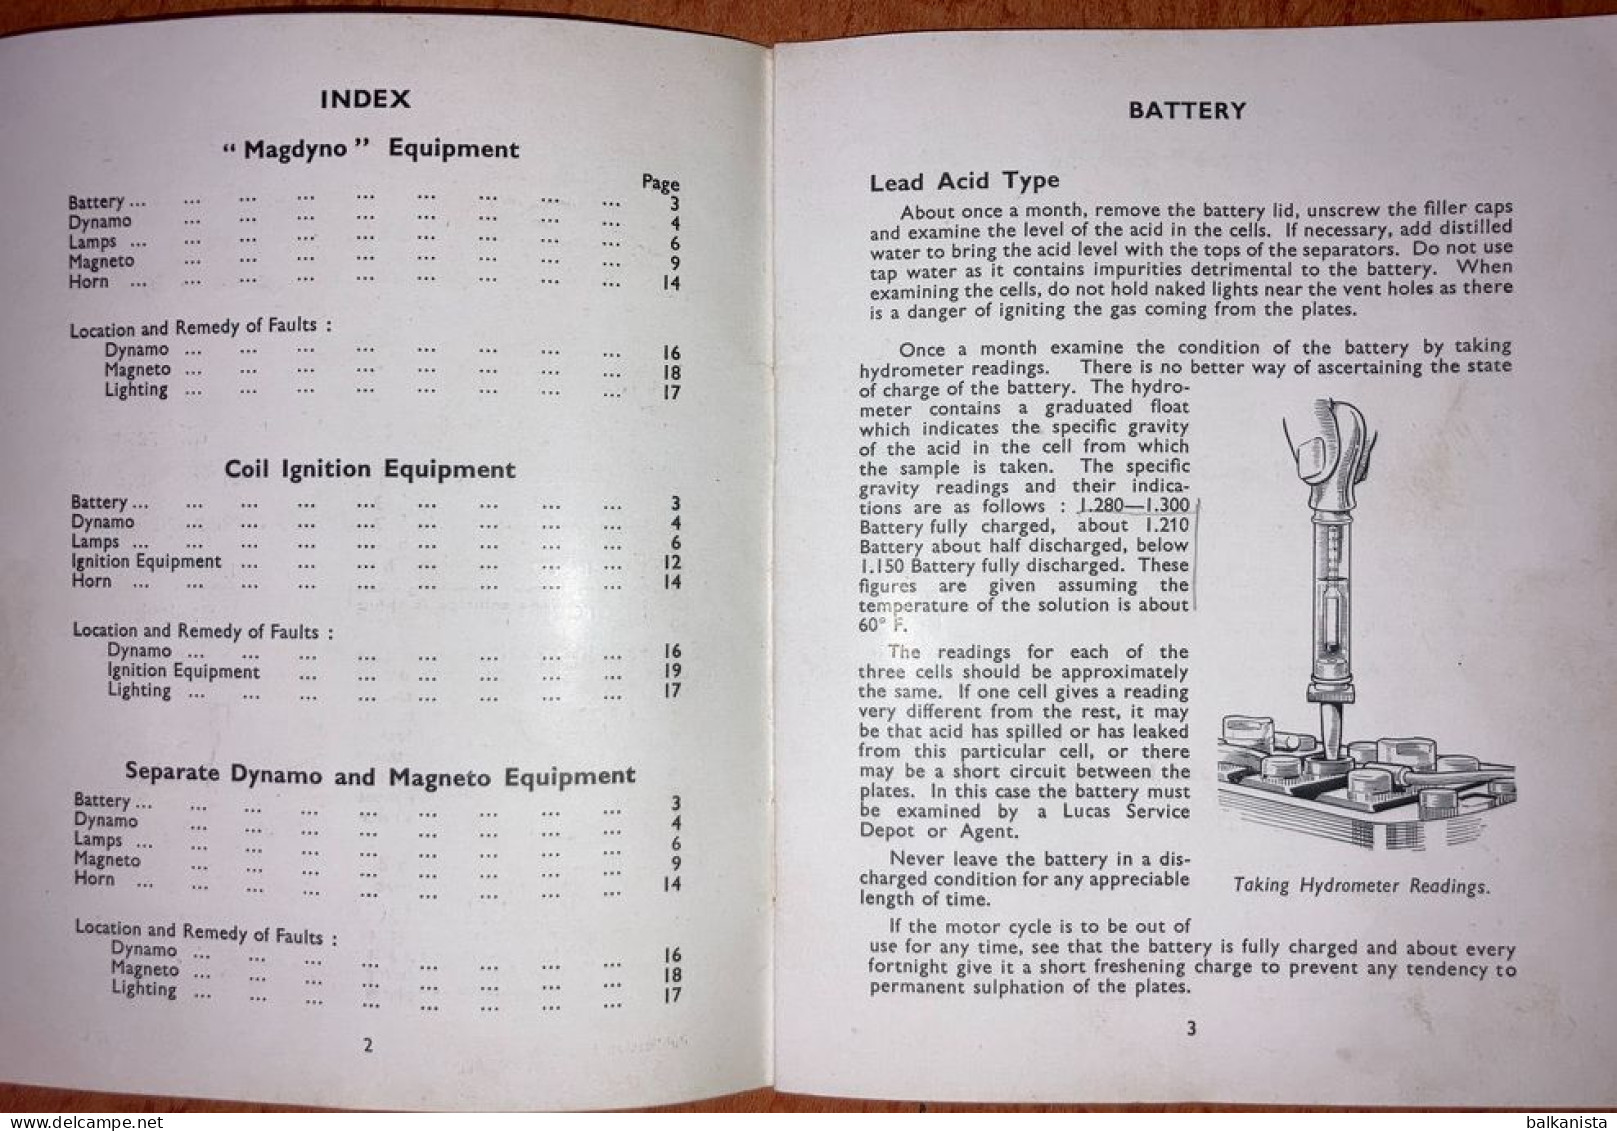 Motorcycle - Instructions For Lucas Electric Lighting And Ignition Equipment - Maschinen